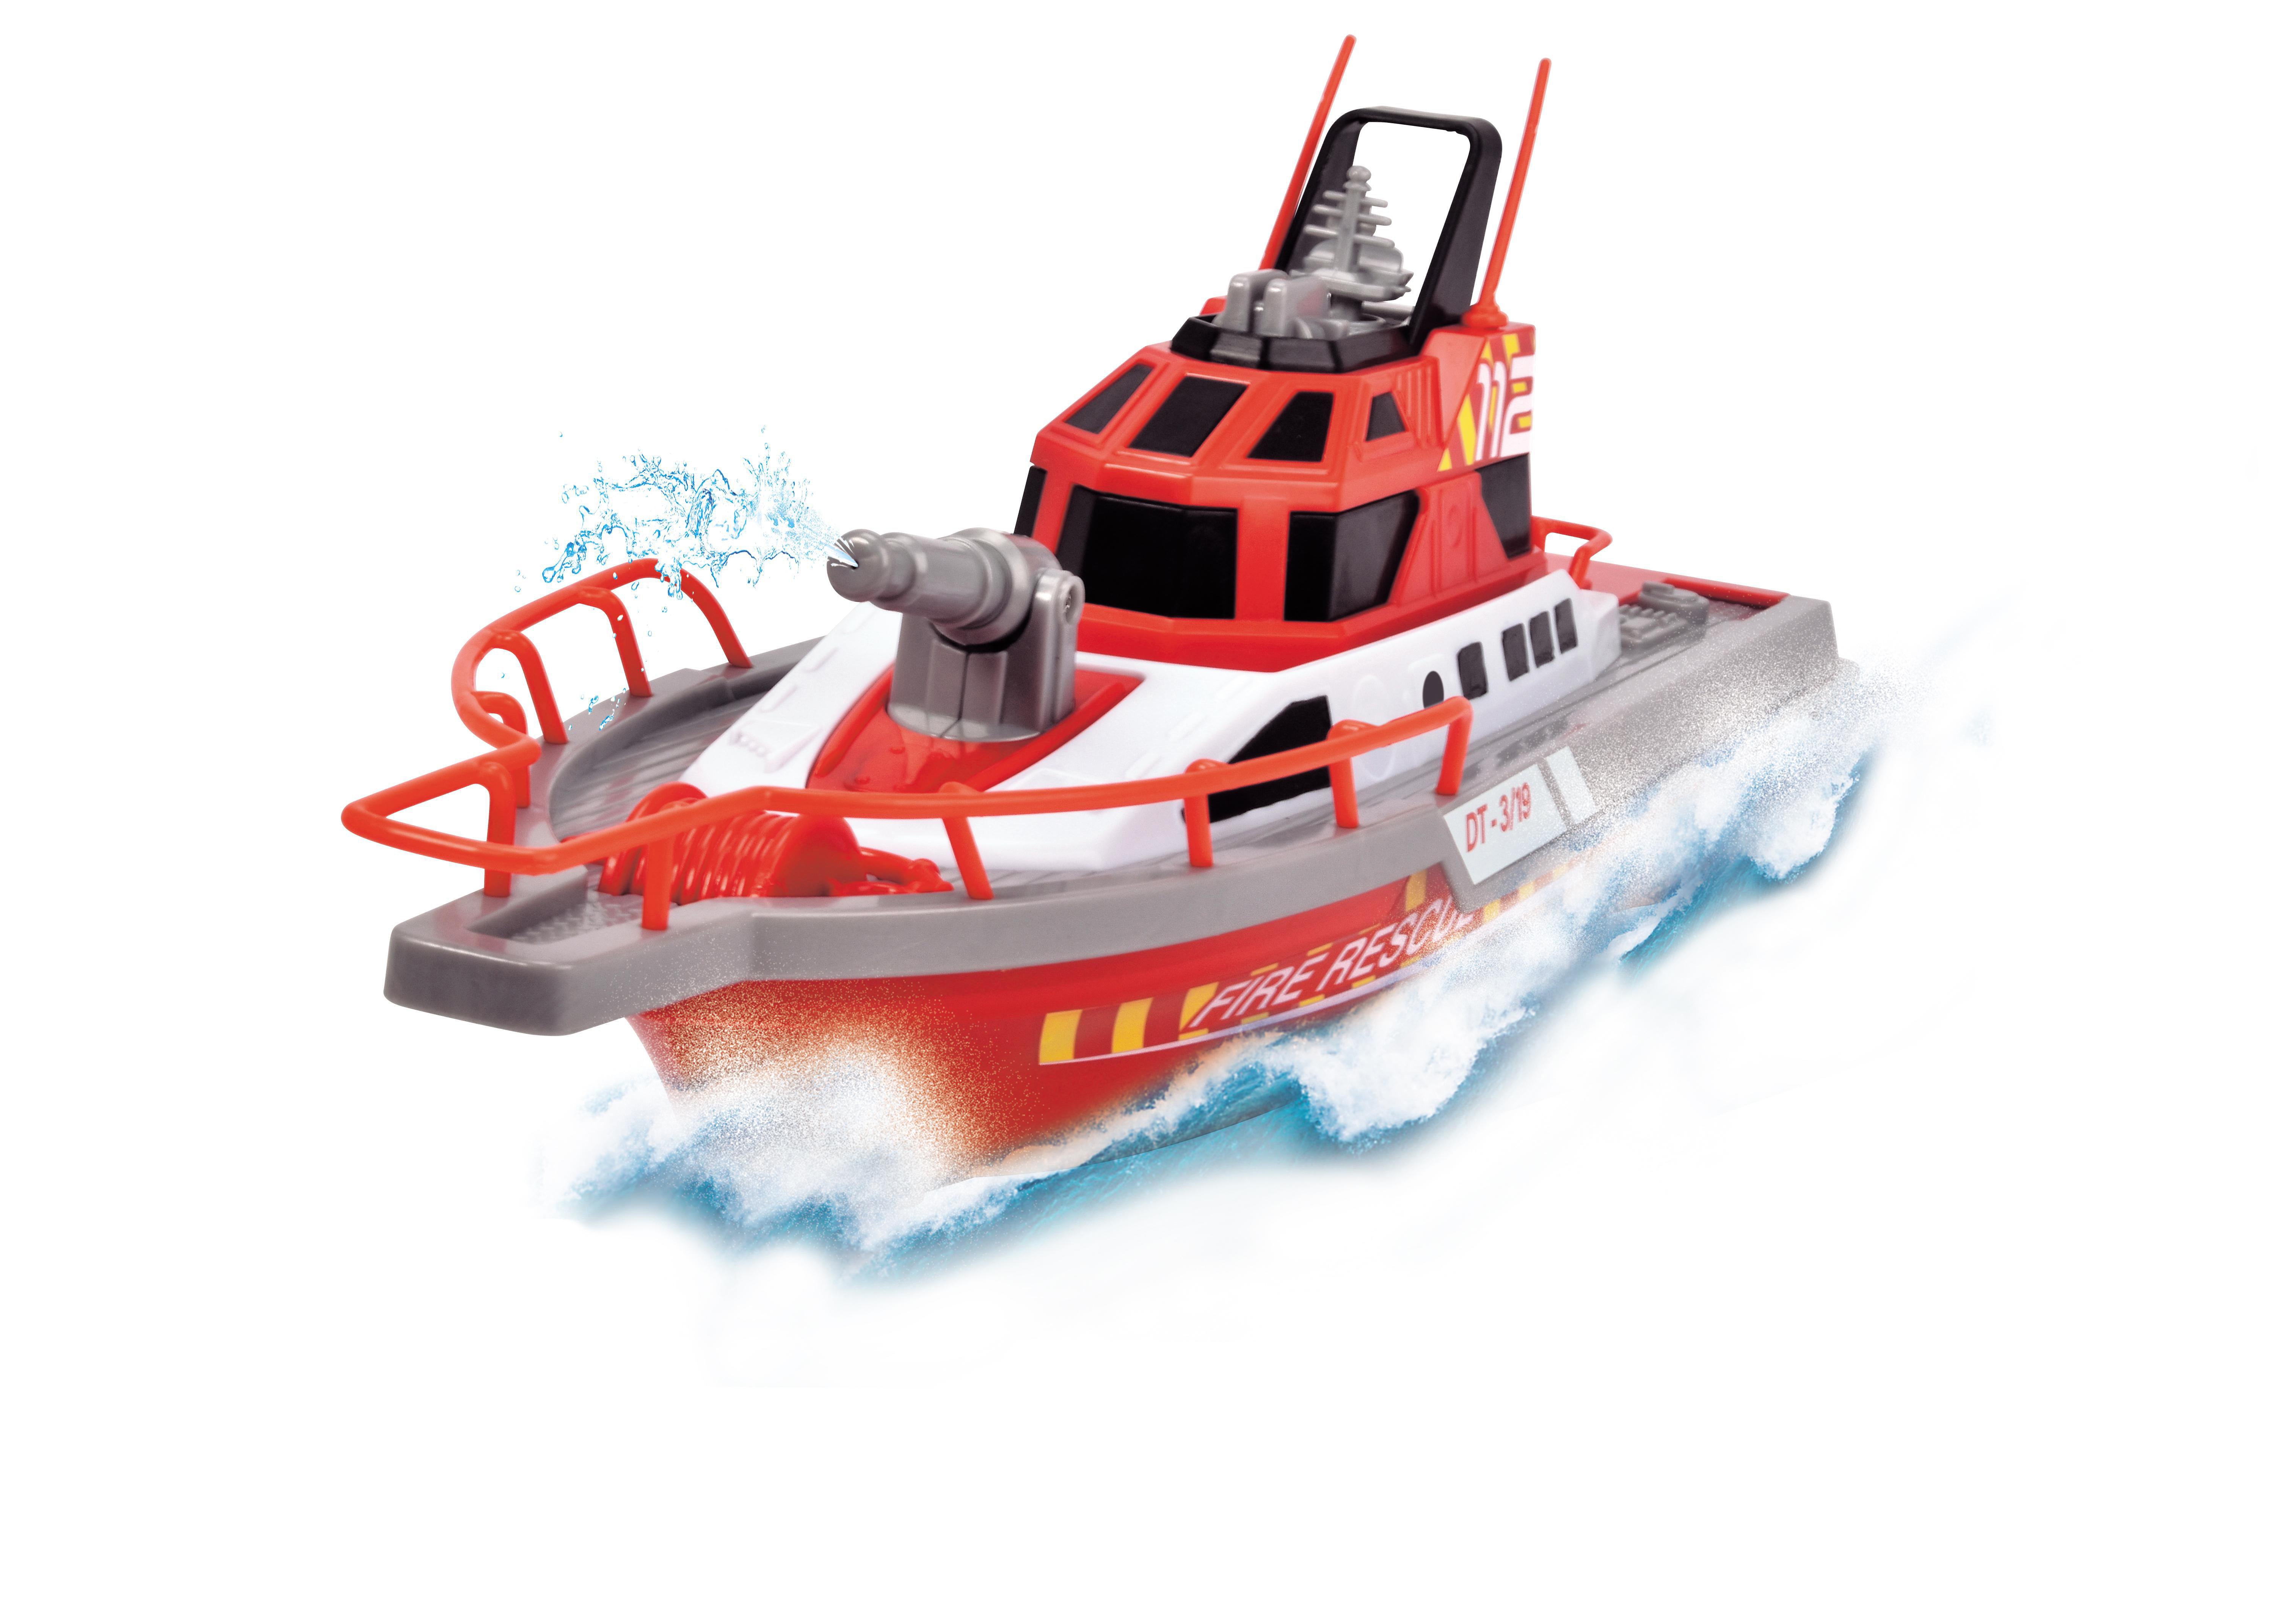 DICKIE-TOYS Spielzeugboot Boot RC Rot Feuerwehr